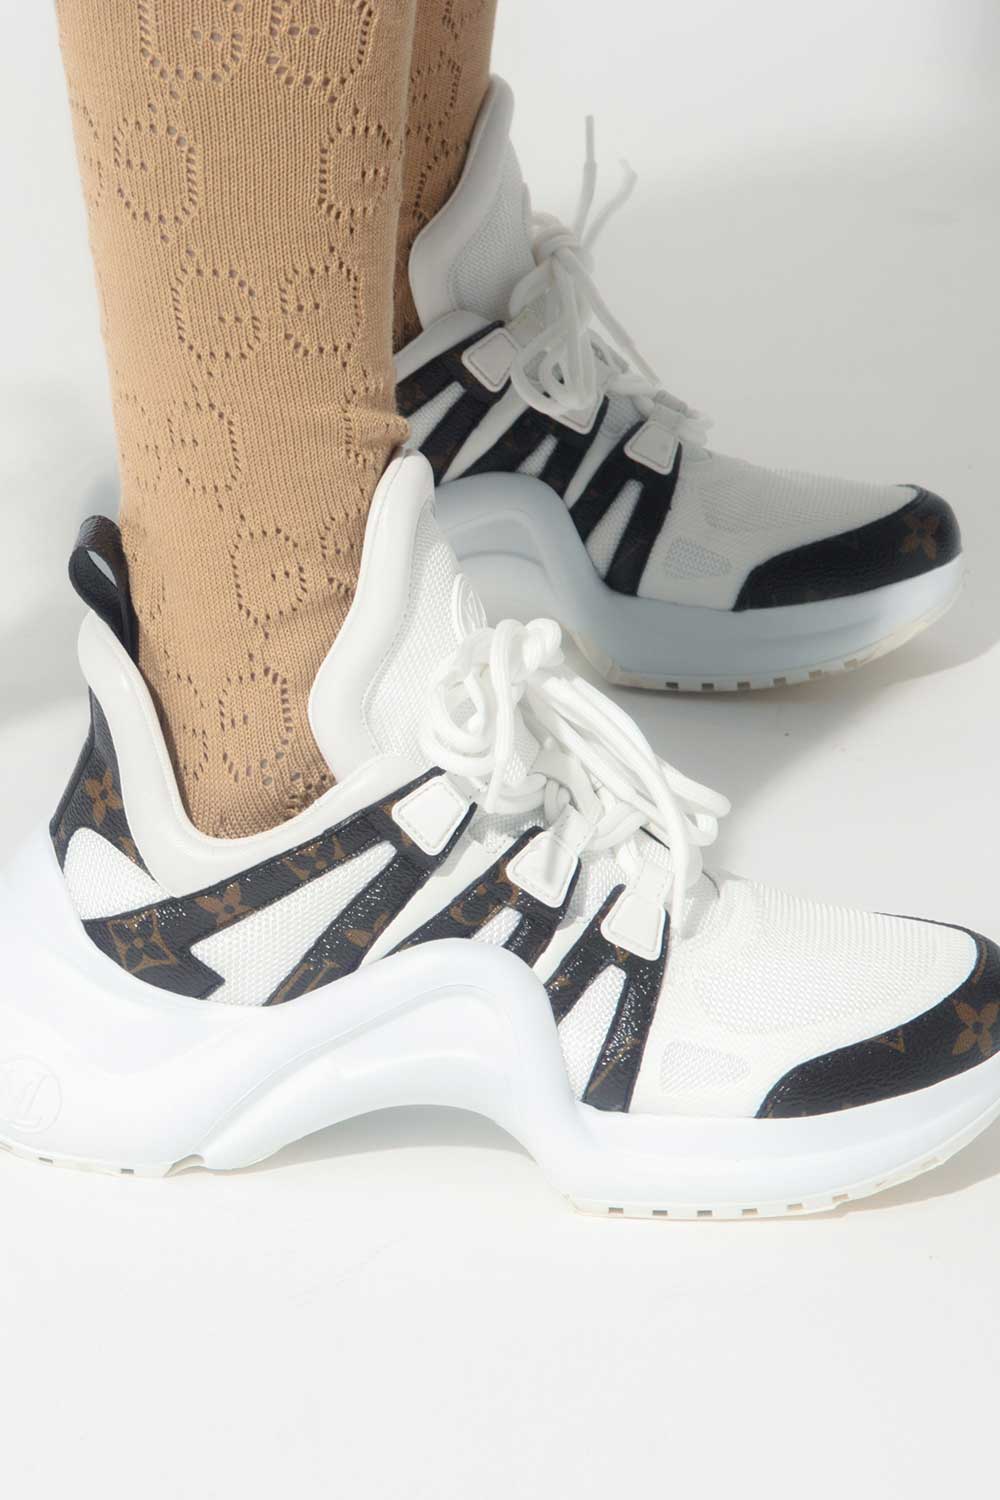 Louis Vuitton Archlight sneakers real vs fake. How to spot counterfeit Loui  V footwear 